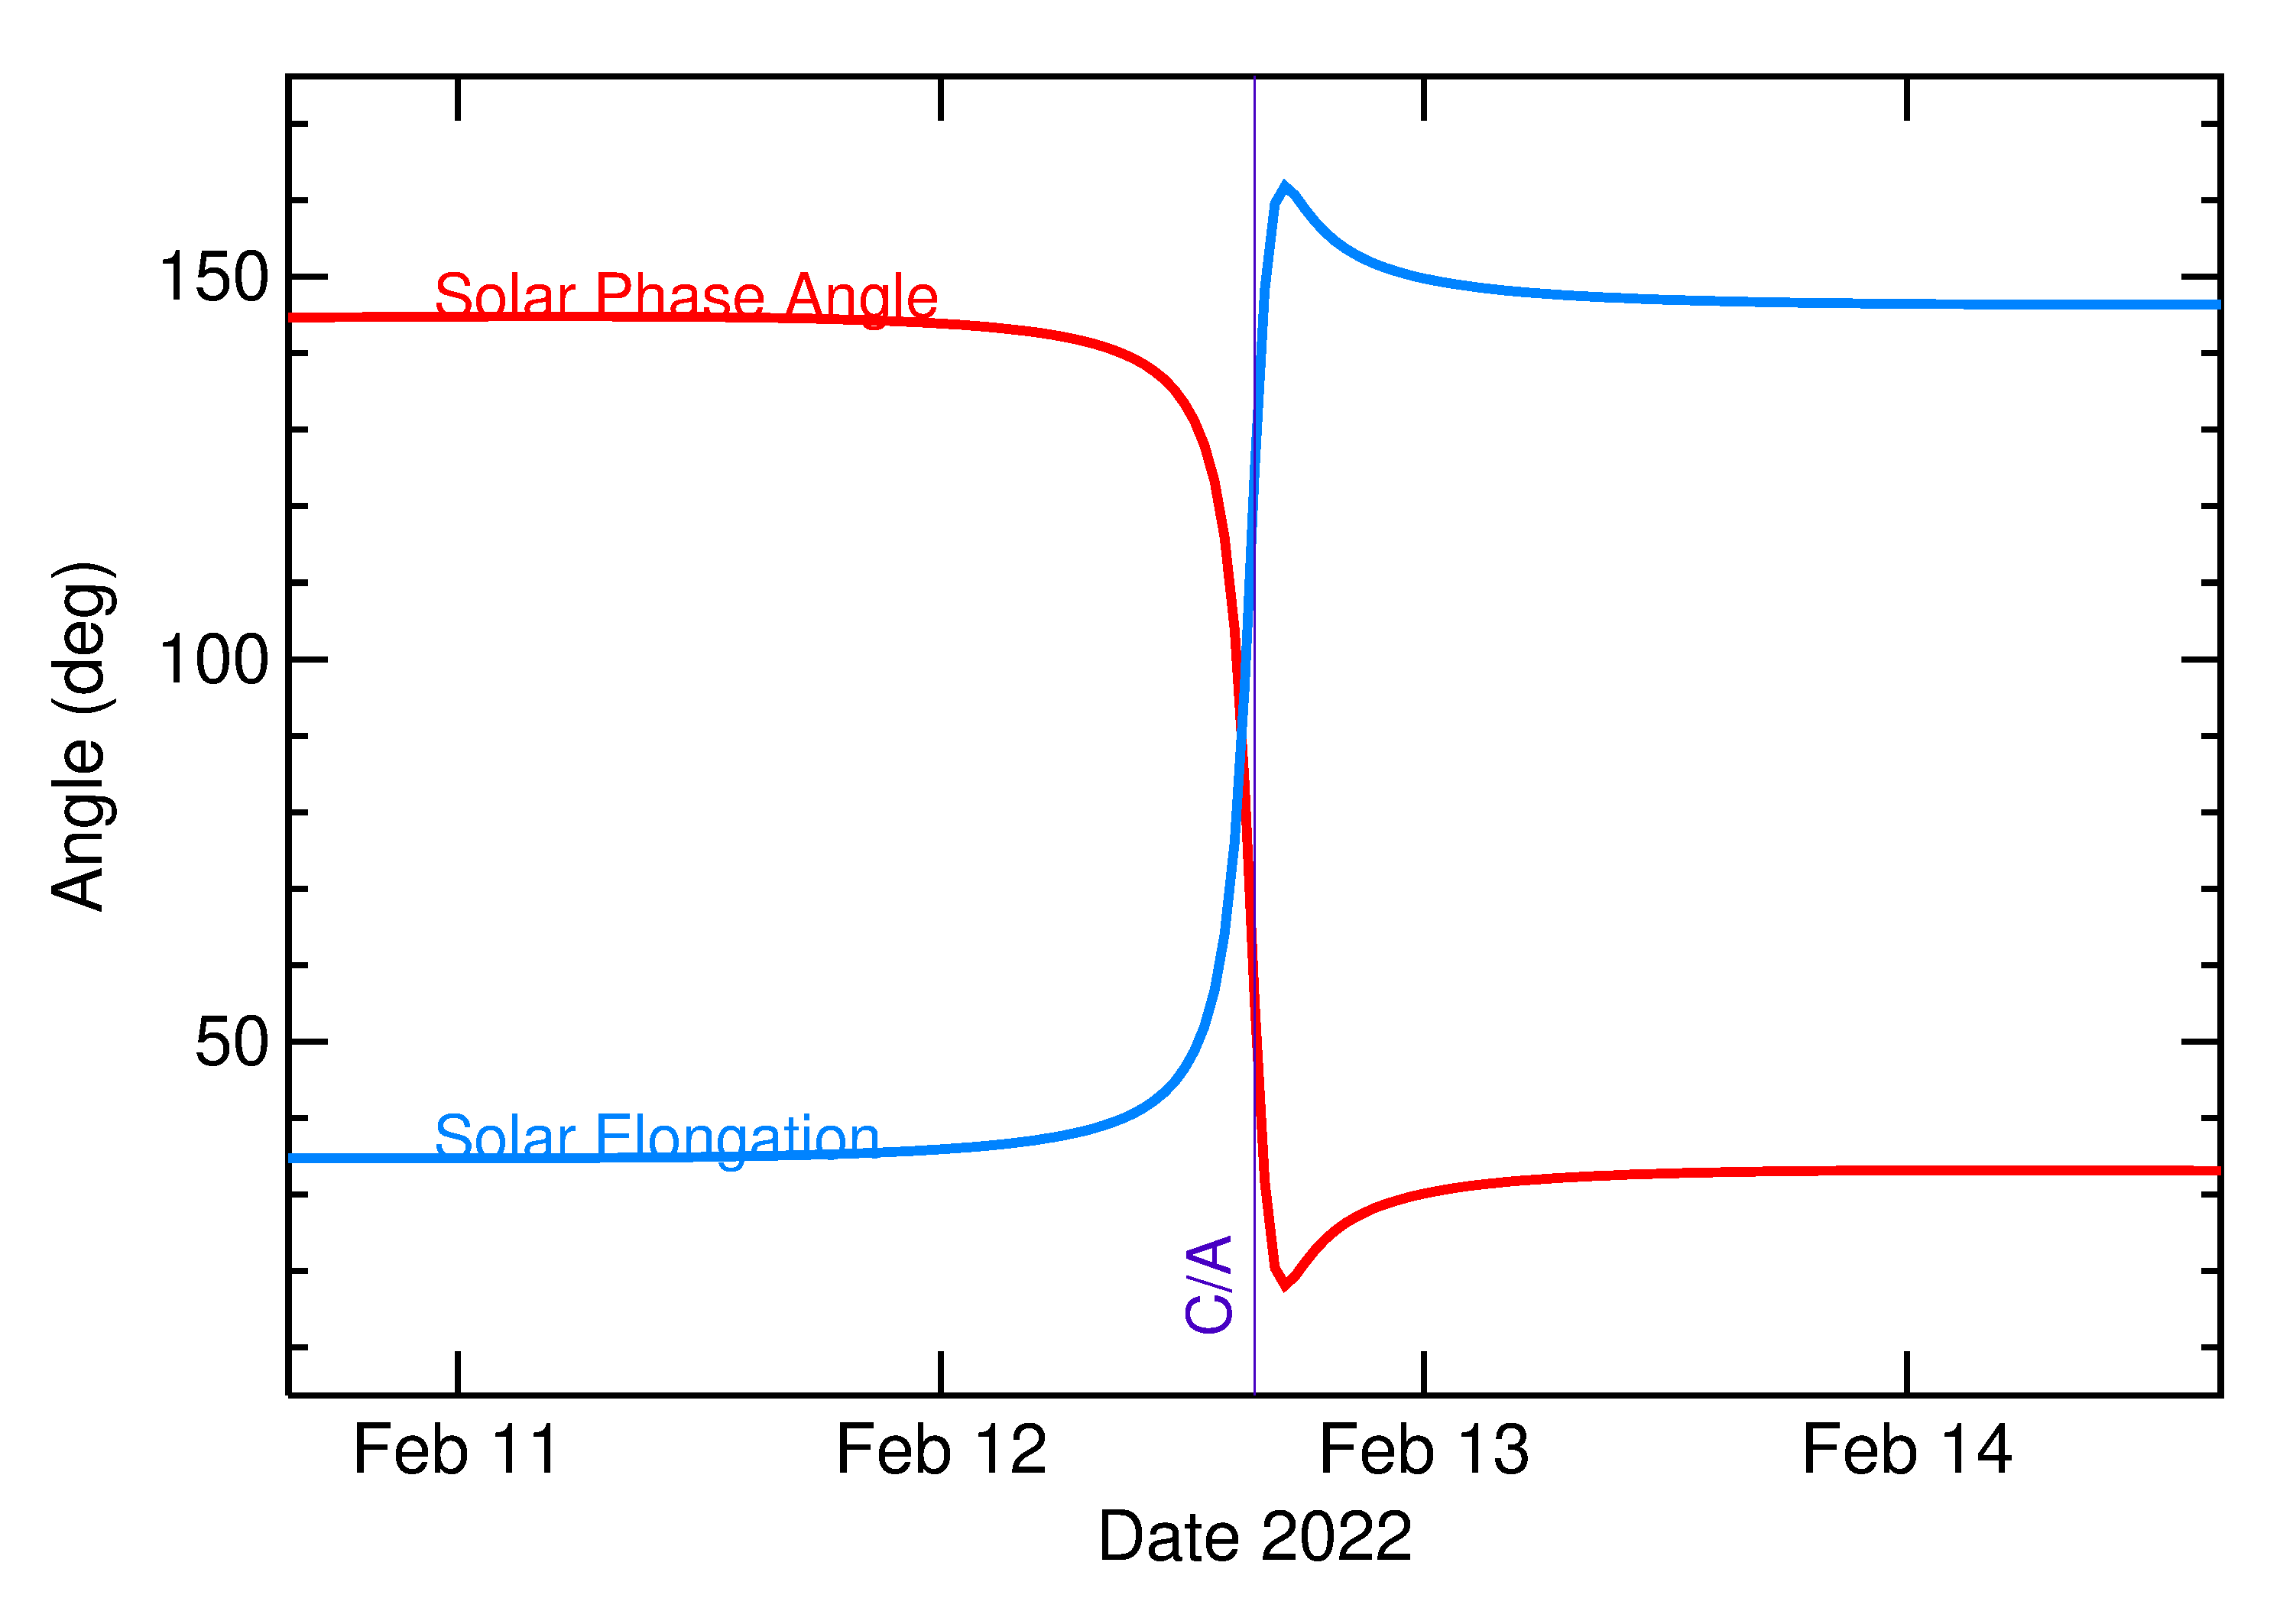 Solar Elongation and Solar Phase Angle of 2022 CG7 in the days around closest approach